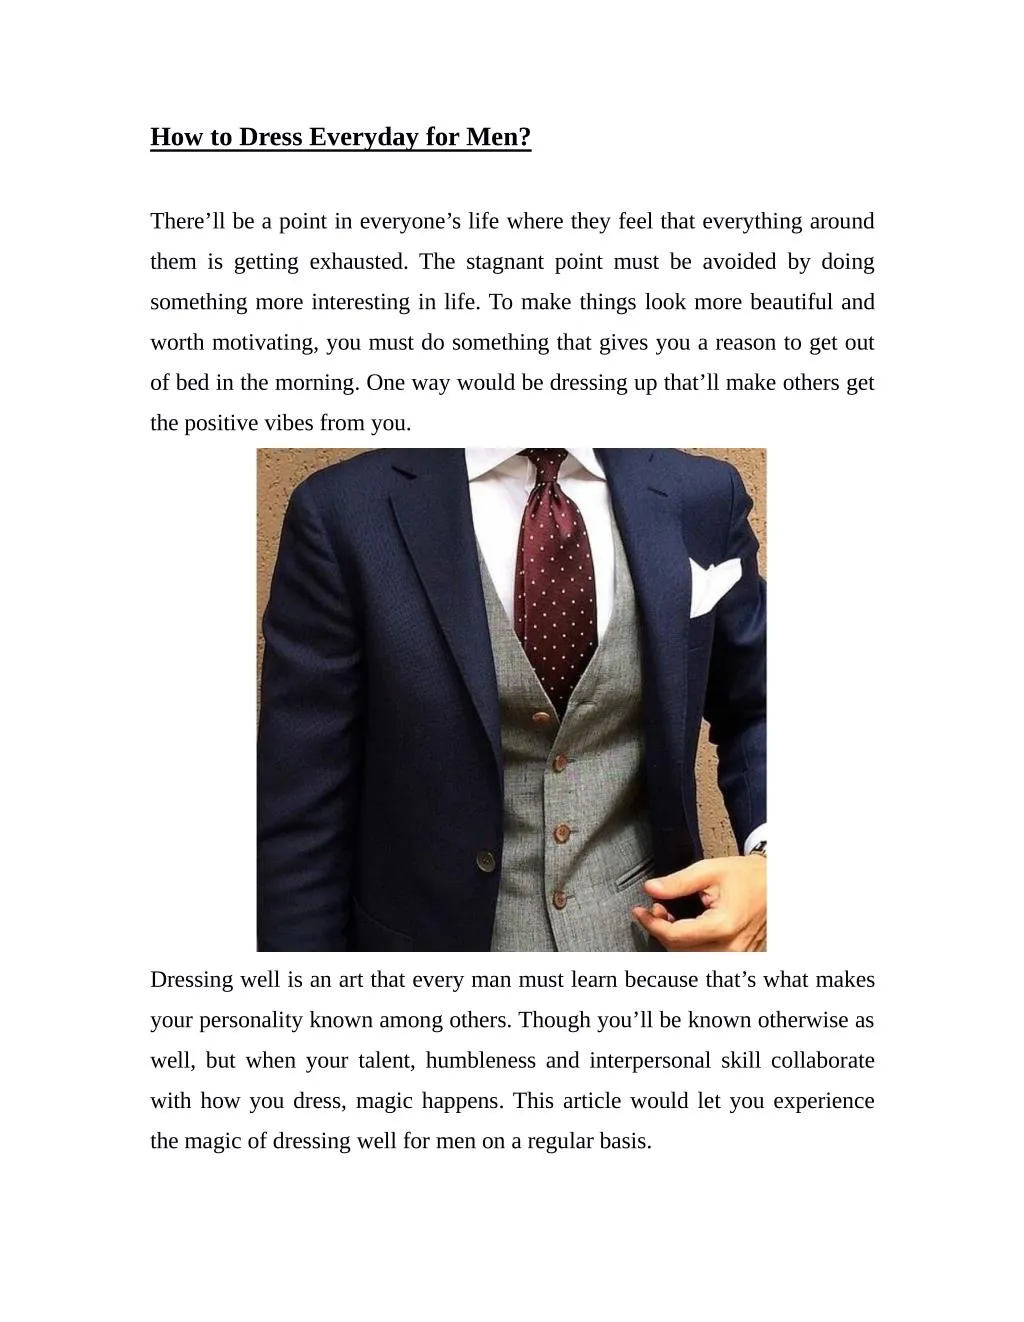 how to dress everyday for men